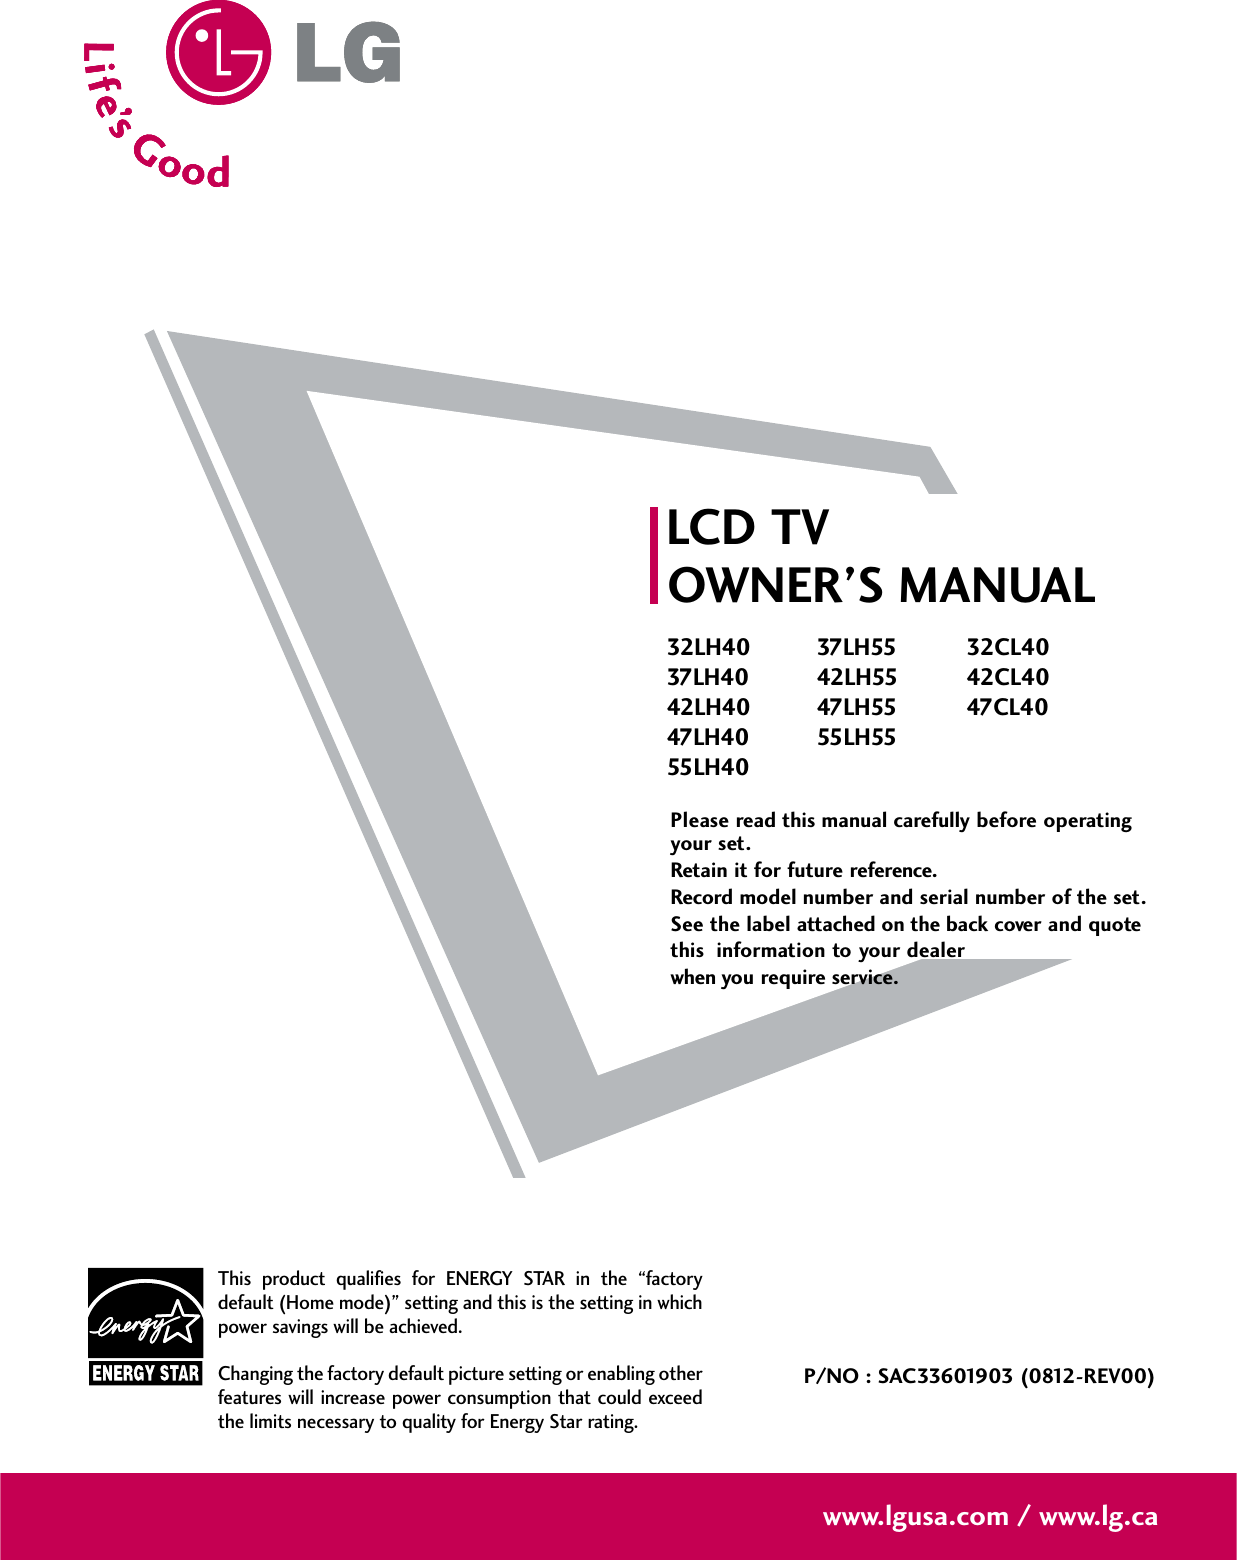 Please read this manual carefully before operatingyour set. Retain it for future reference.Record model number and serial number of the set. See the label attached on the back cover and quote this  information to your dealer when you require service.LCD TVOWNER’S MANUAL32LH4037LH4042LH4047LH4055LH4037LH5542LH5547LH5555LH5532CL4042CL4047CL40P/NO : SAC33601903 (0812-REV00)www.lgusa.com / www.lg.caThis product qualifies for ENERGY STAR in the “factorydefault (Home mode)” setting and this is the setting in whichpower savings will be achieved.Changing the factory default picture setting or enabling otherfeatures will increase power consumption that could exceedthe limits necessary to quality for Energy Star rating.